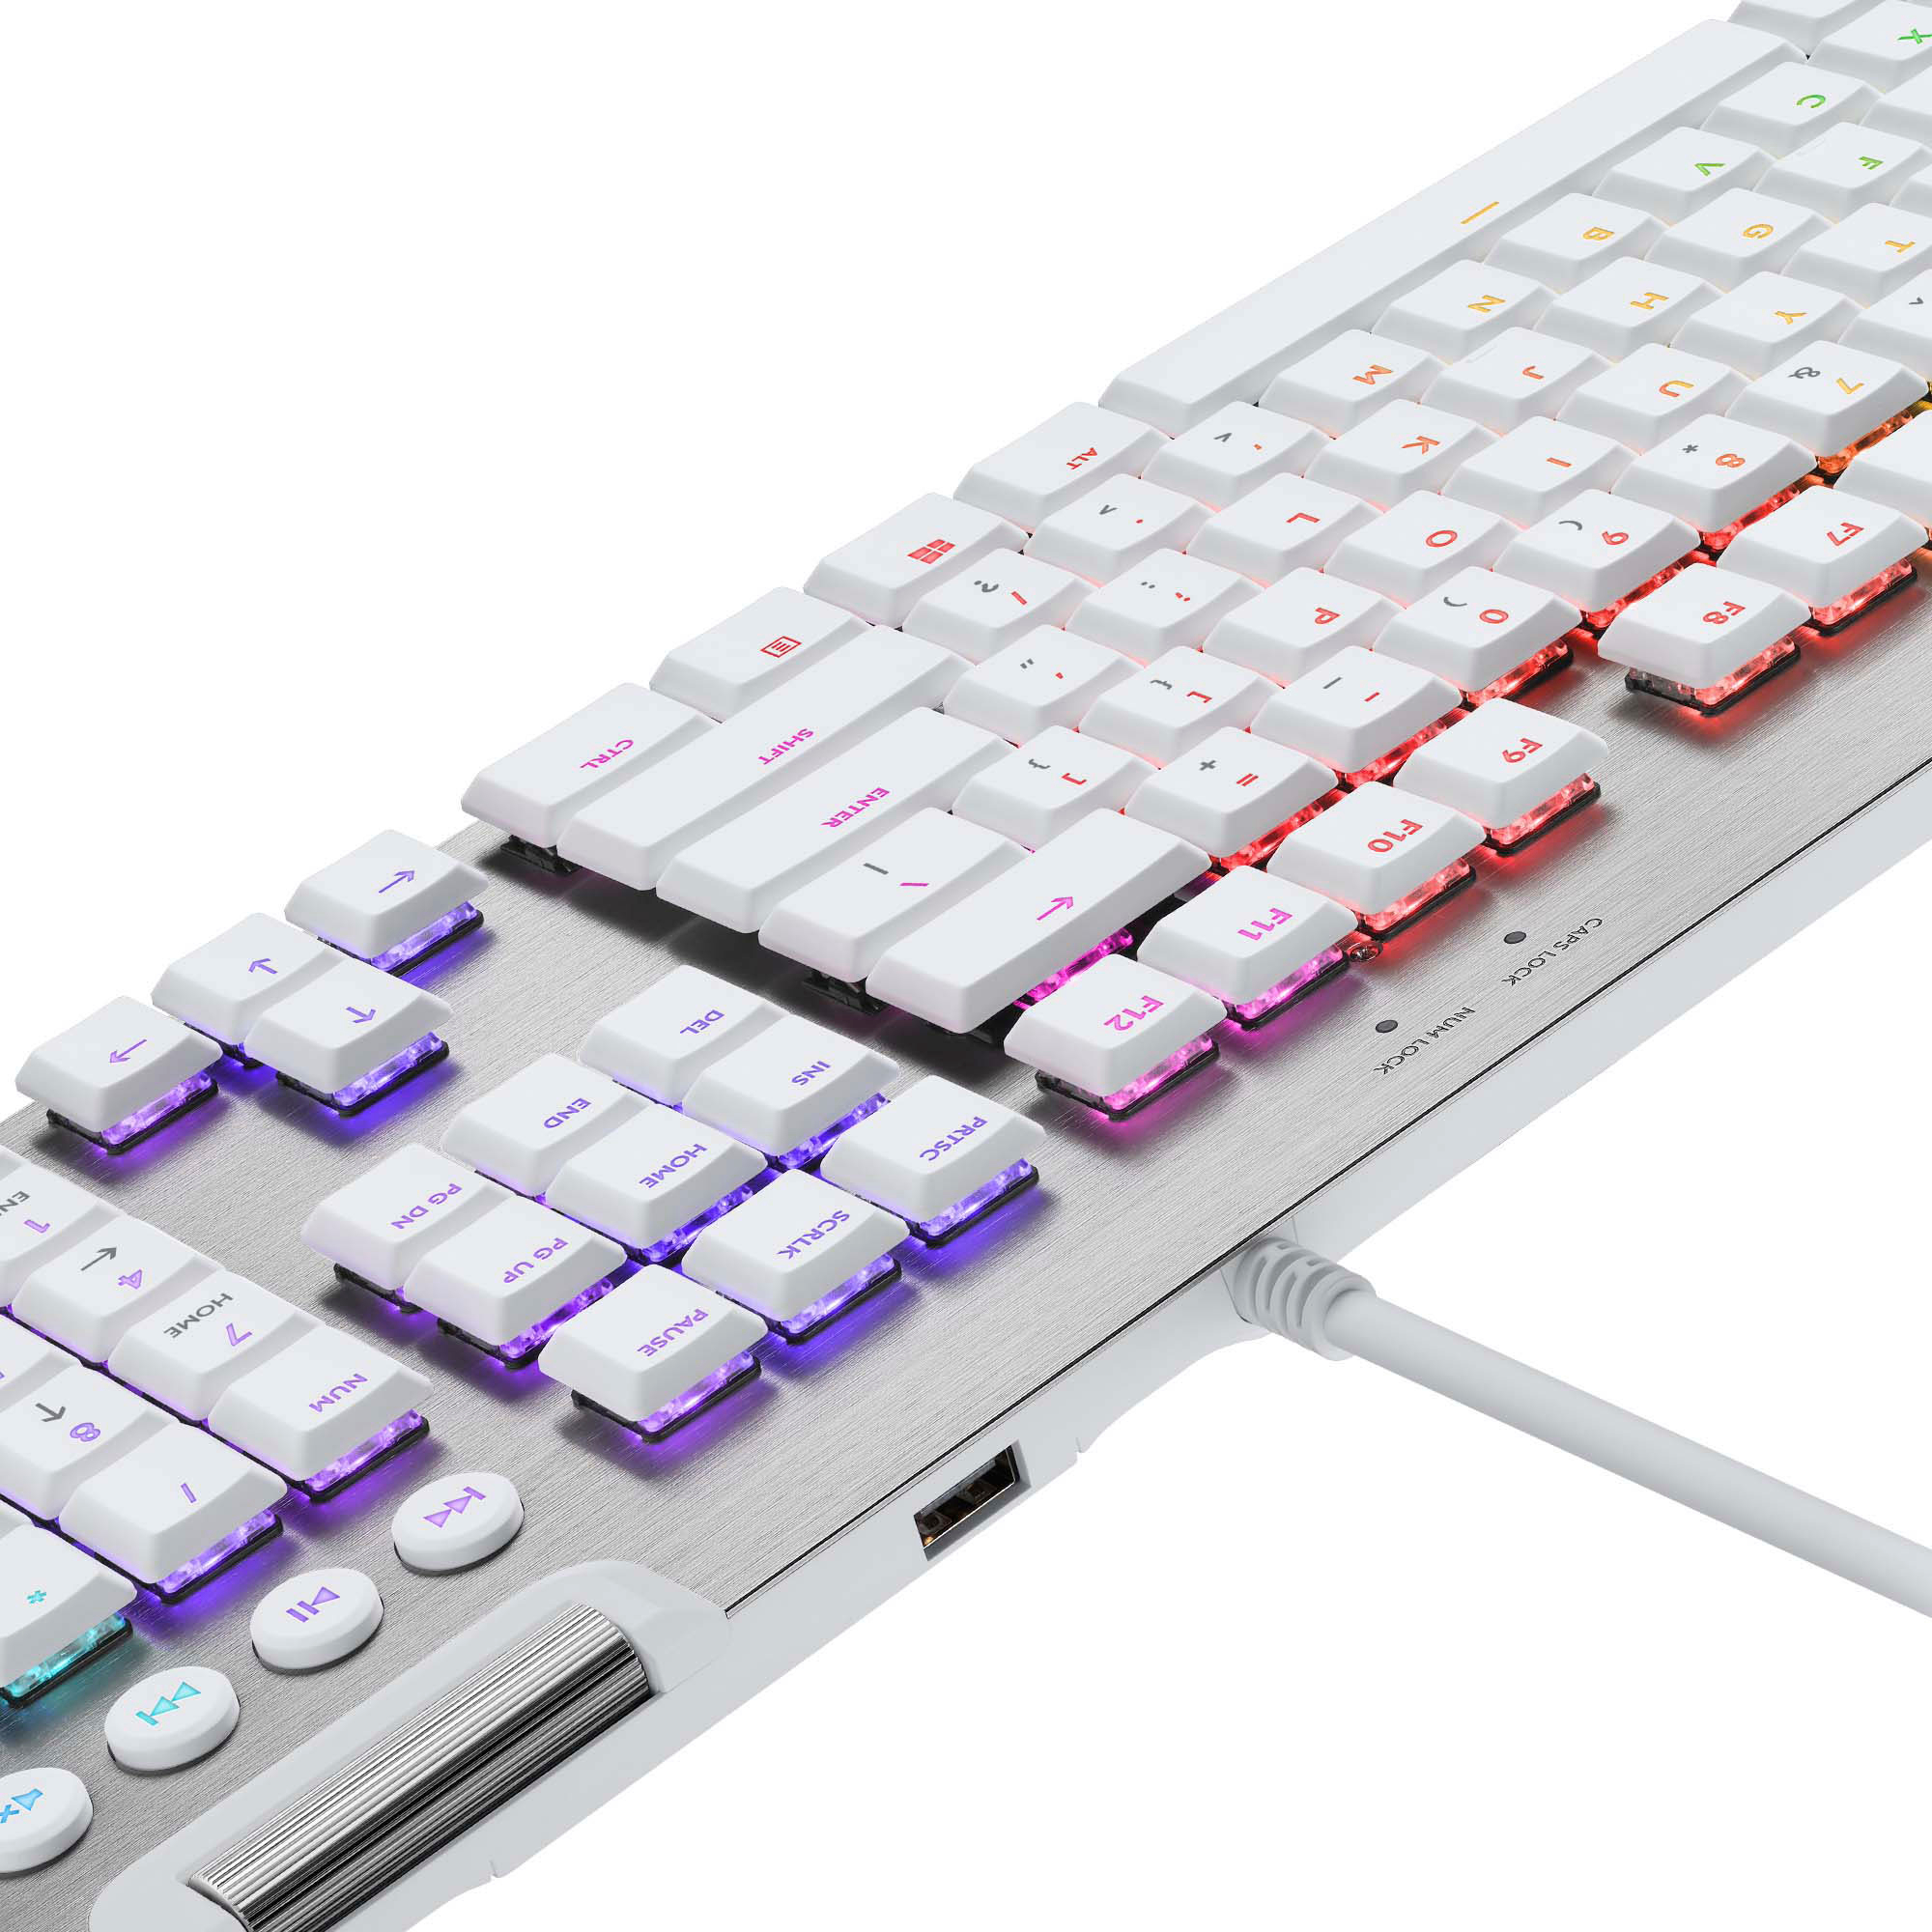 Logitech G815 LIGHTSYNC Full-size Wired Mechanical GL Tactile Switch Gaming  Keyboard with RGB Backlighting White 920-011354 - Best Buy